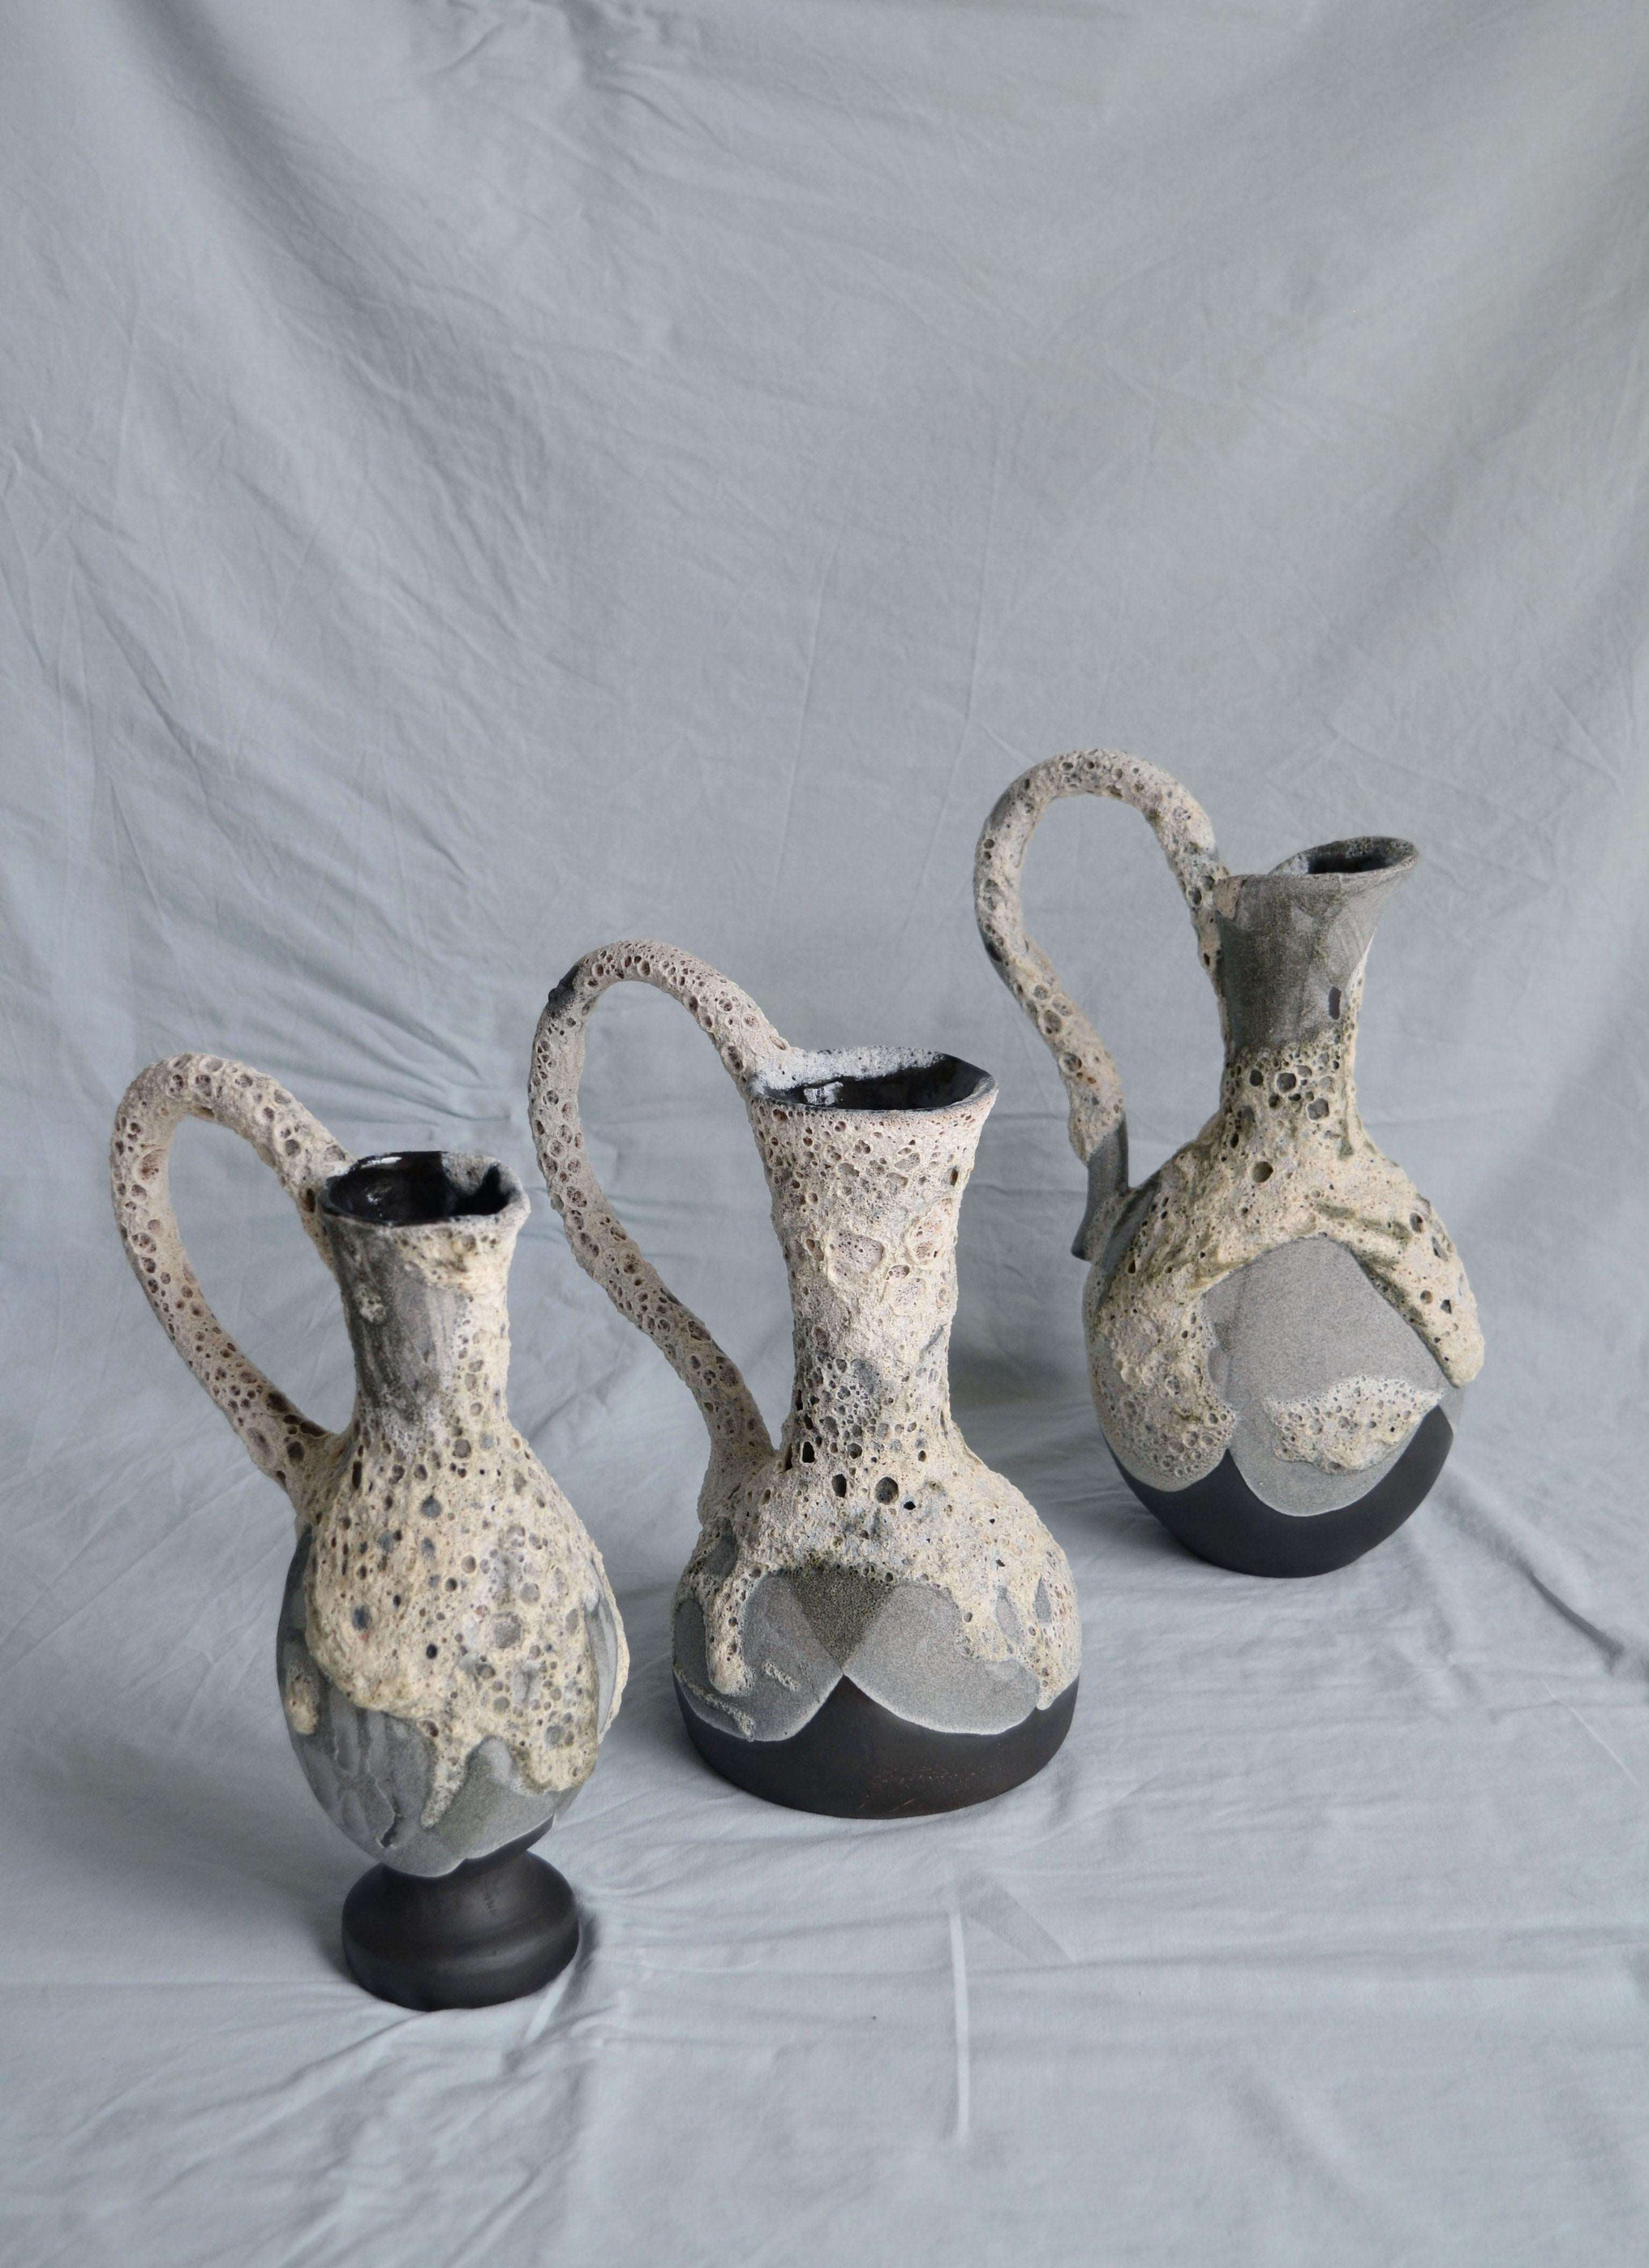 Carafe 7 vase by Anna Karountzou
Dimensions: W 15.5 x D 14.5 x H 32 cm
Materials: black stoneware clay, clear glaze inside, handmade crater glaze outside, fired at 1220

Born and based in Athens, Greece, with a background in conservation of